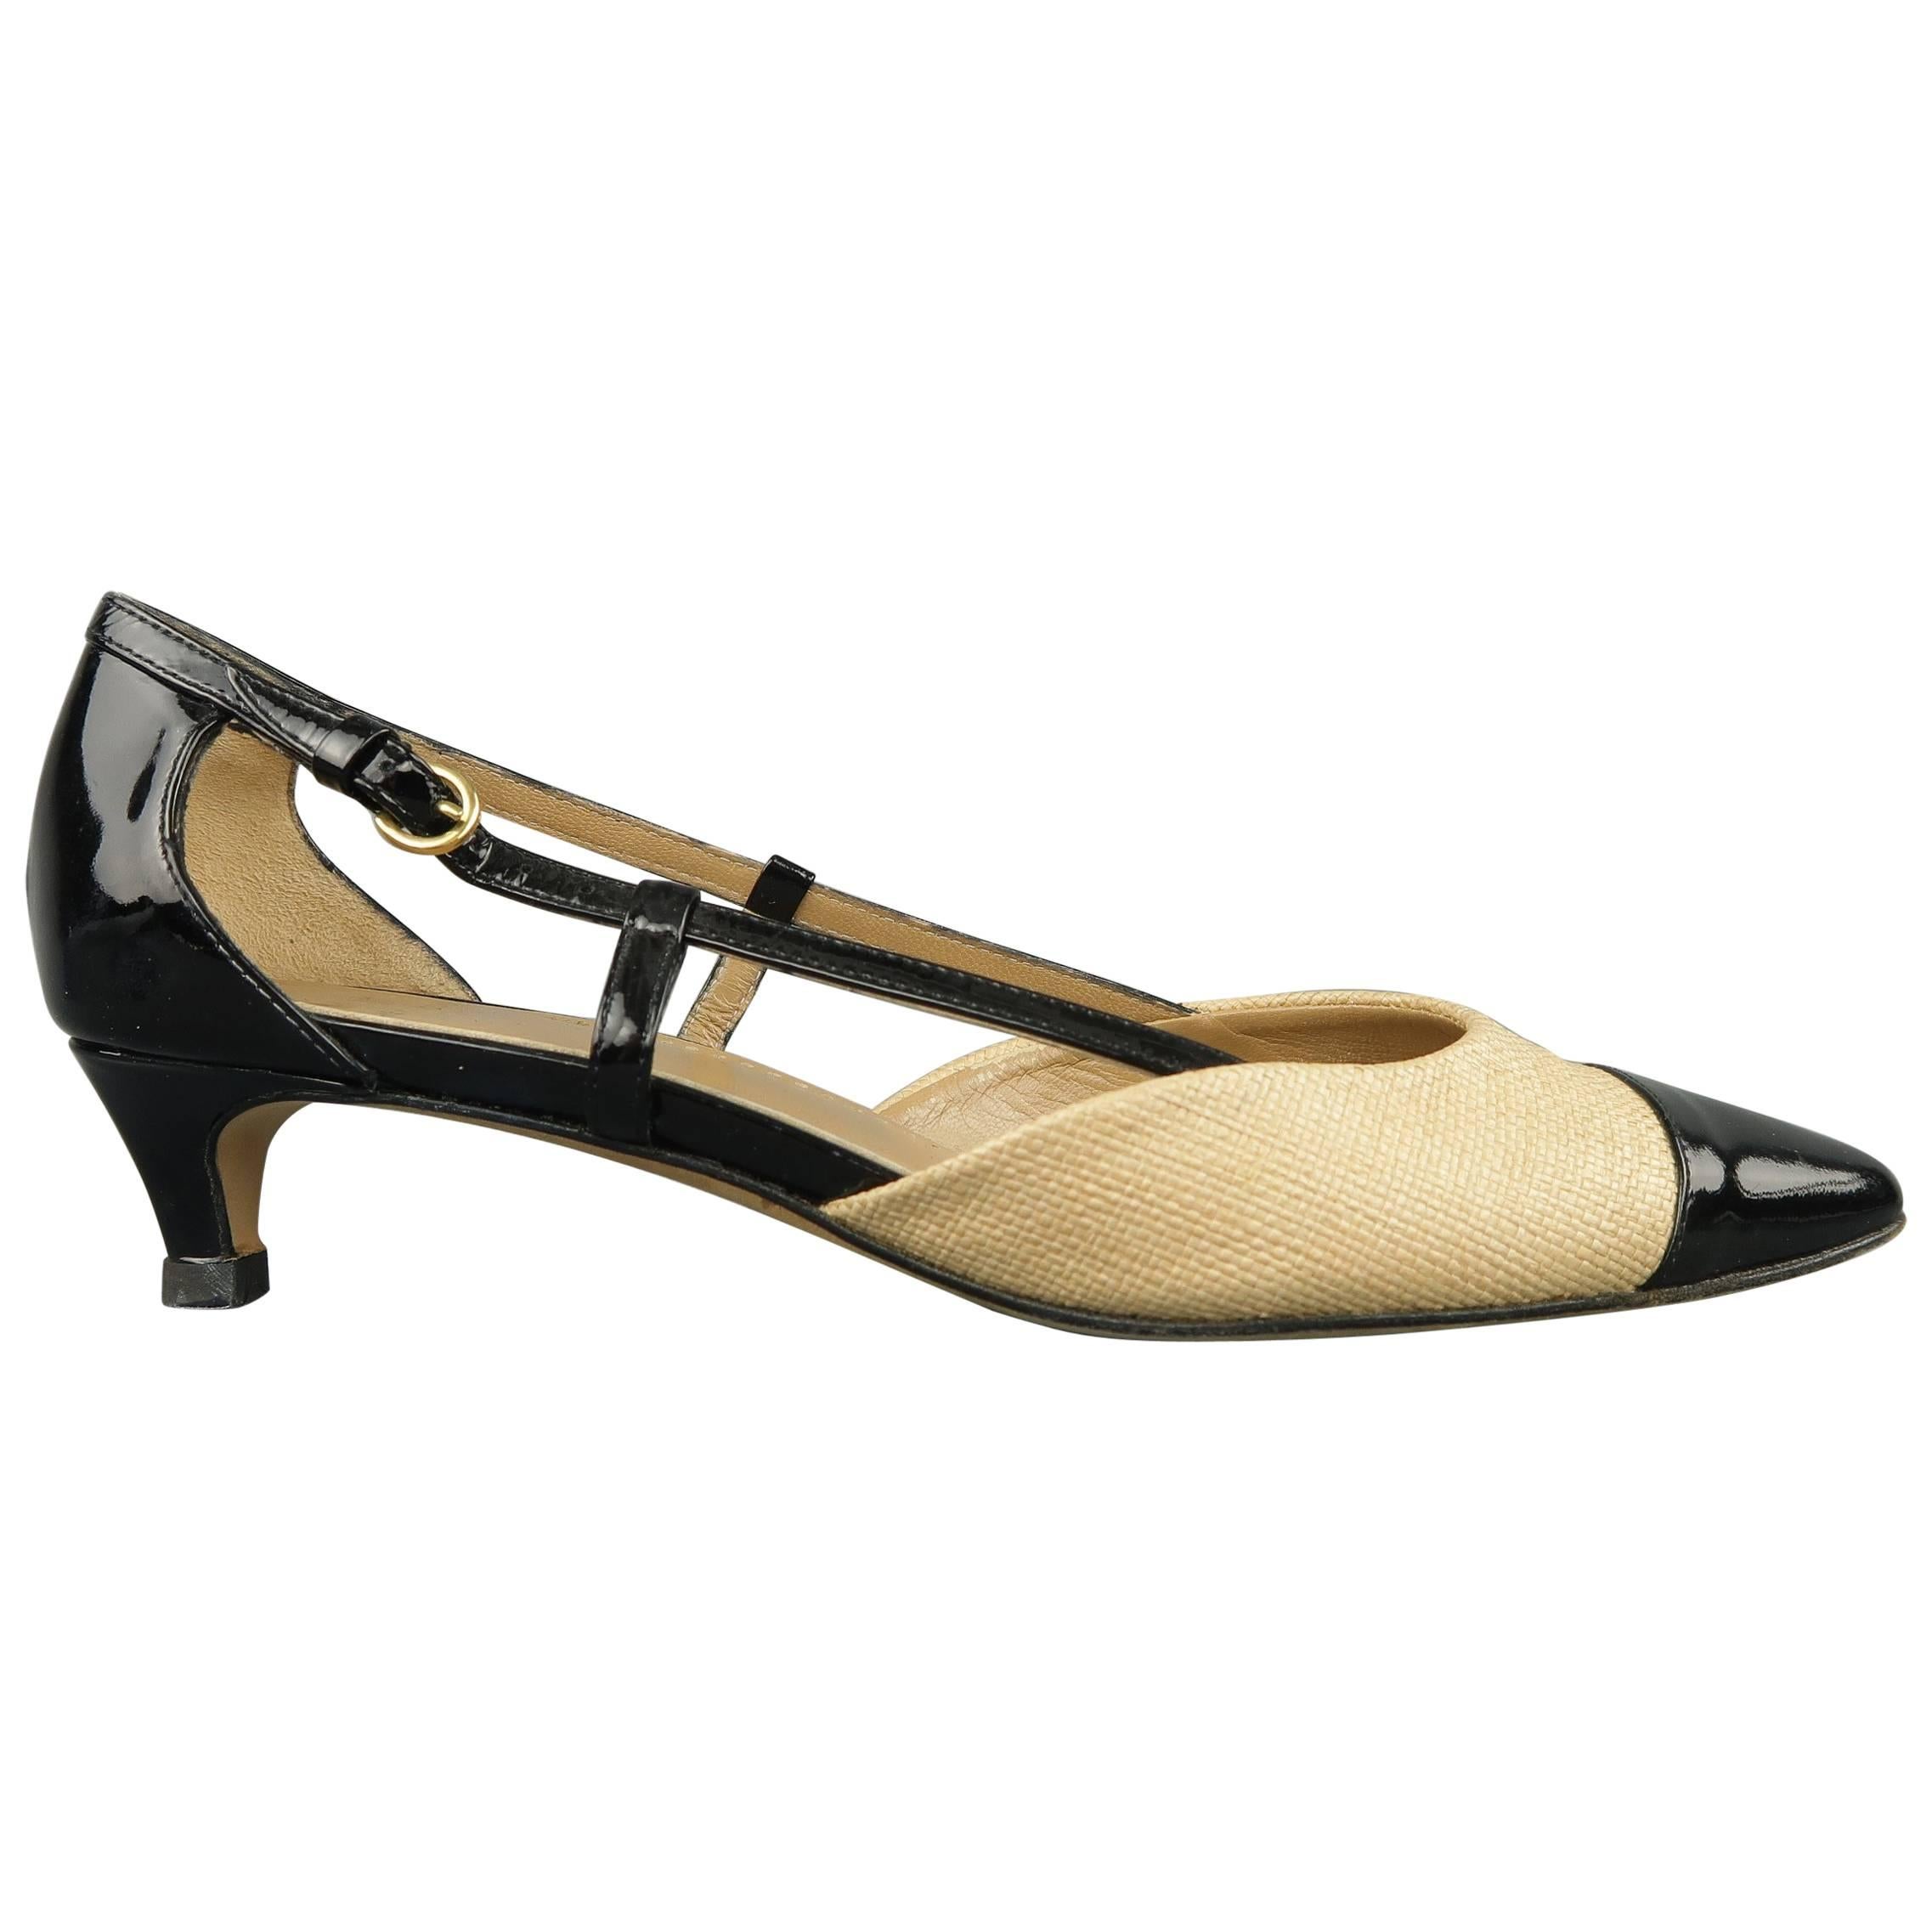 MOSCHINO Size 7 Beige Woven Fabric & Black Patent Leather Pumps